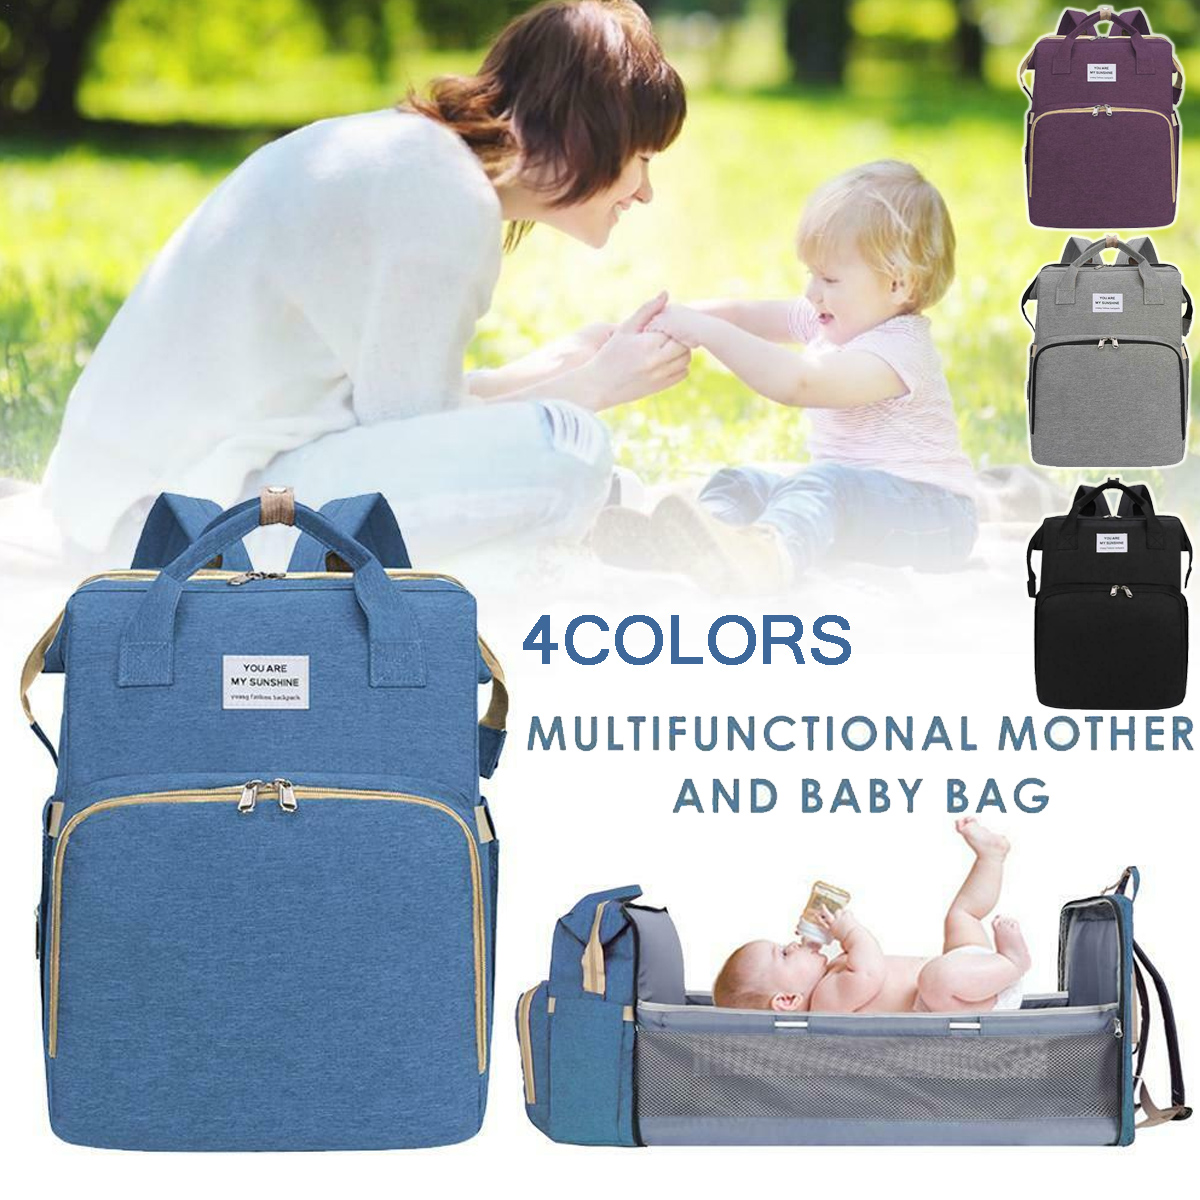 Portable-Diaper-Bag-Folding-Baby-Travel-Large-Backapack-Outdoor-Foldable-Baby-Bed-Mommy-Bags-1759461-1